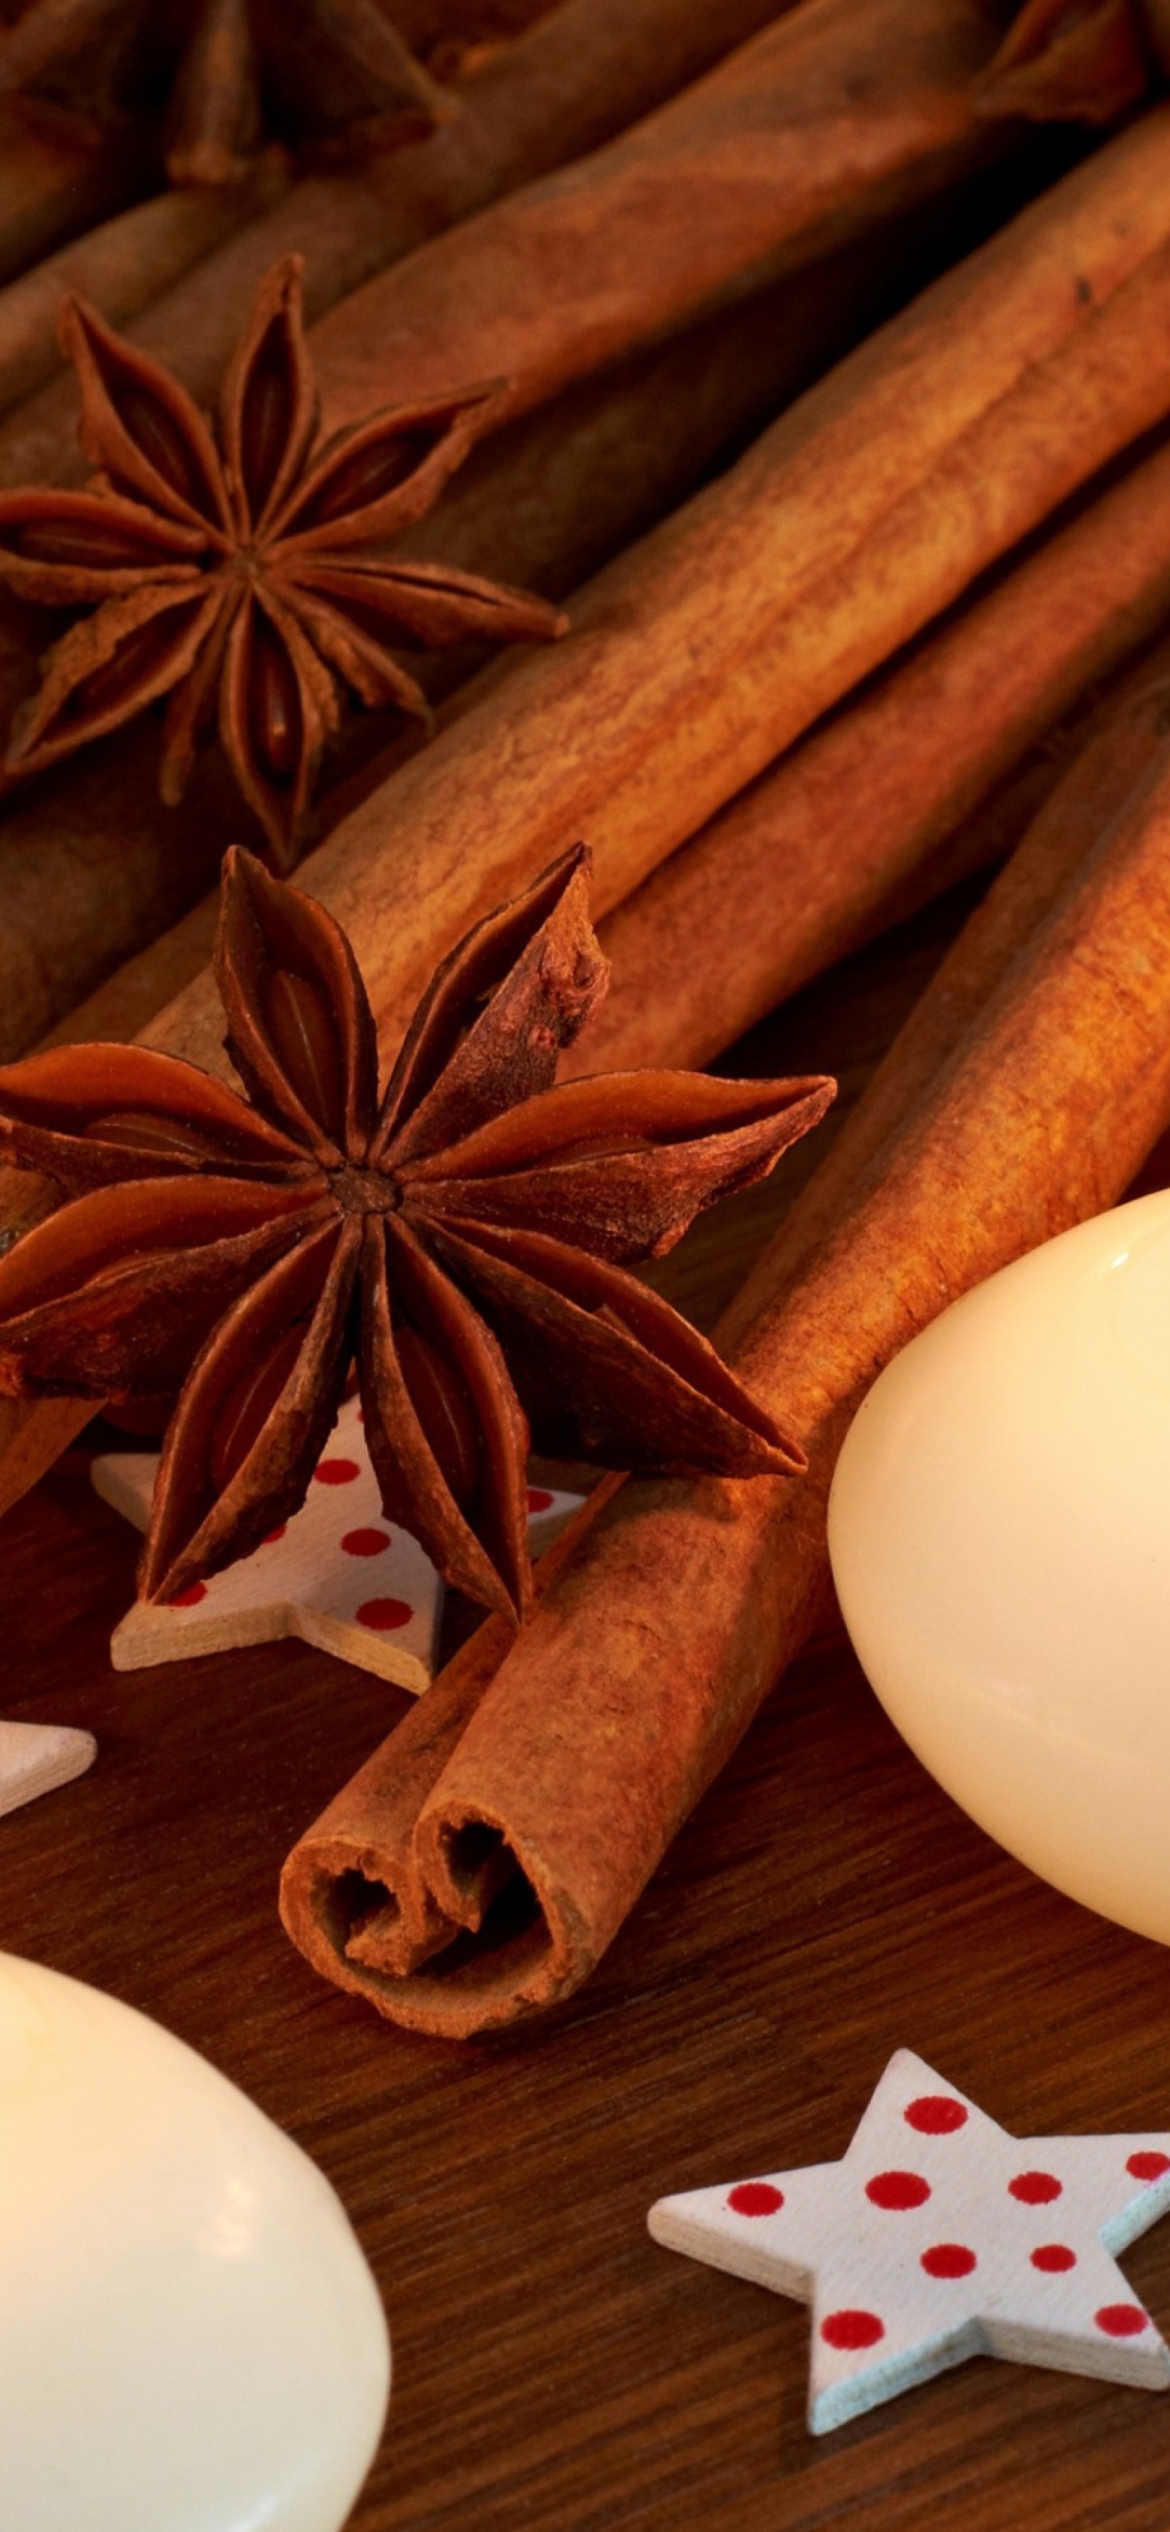 Star Anise And Cinnamon wallpaper 1170x2532